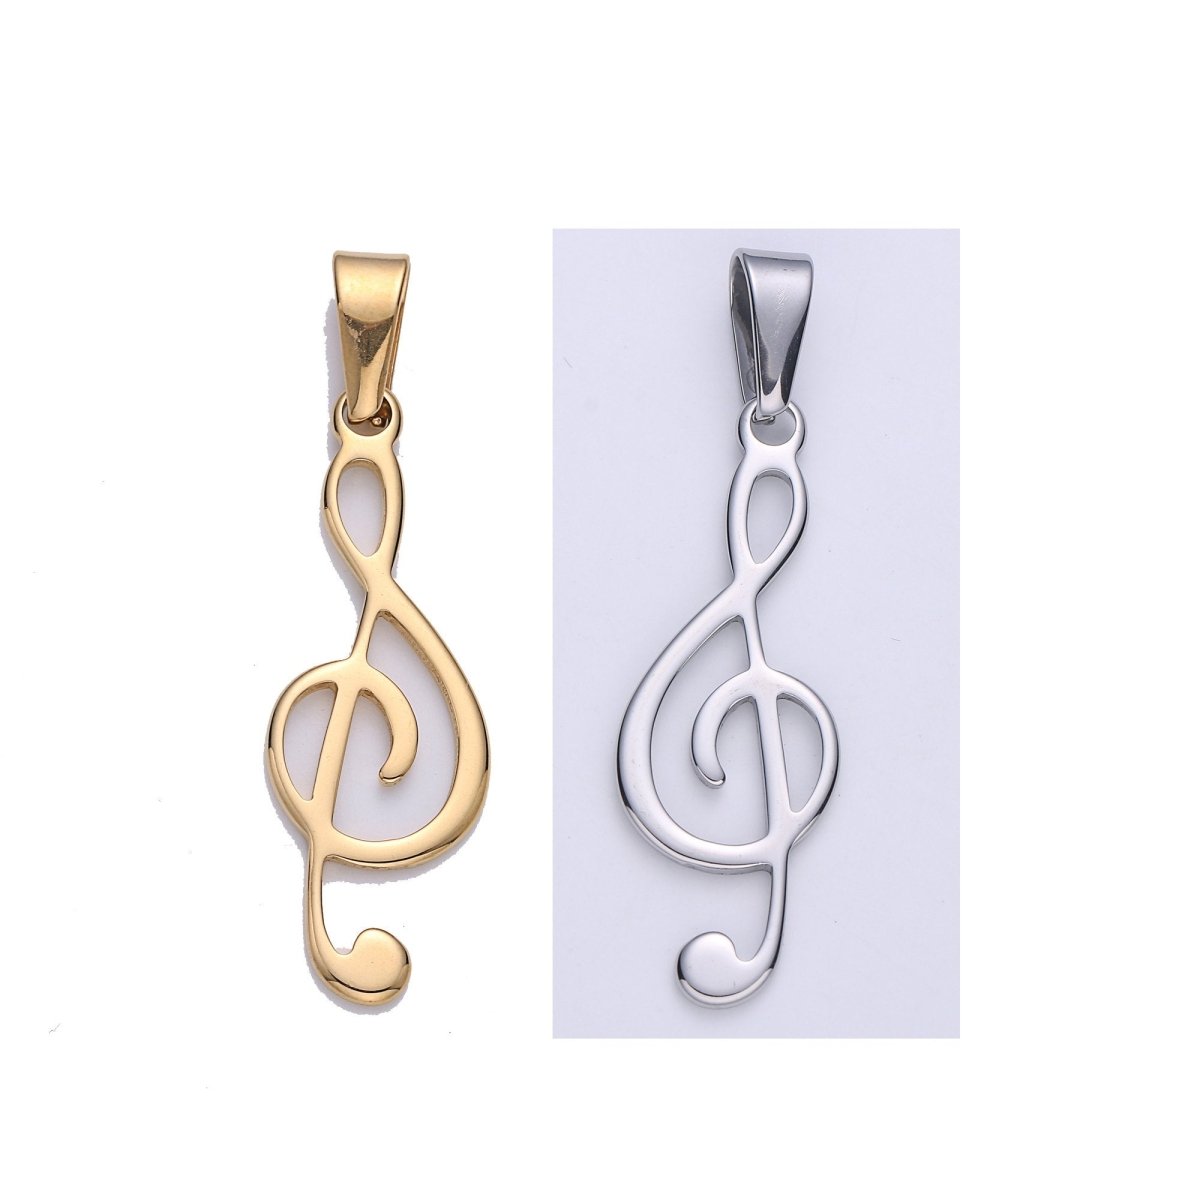 Gold Filled Stainless Steel Musical Note Pendant, Note Charm Music Lovers Gift Jewelry Silver Note Charm for Necklace Bracelet Making J-669 - DLUXCA